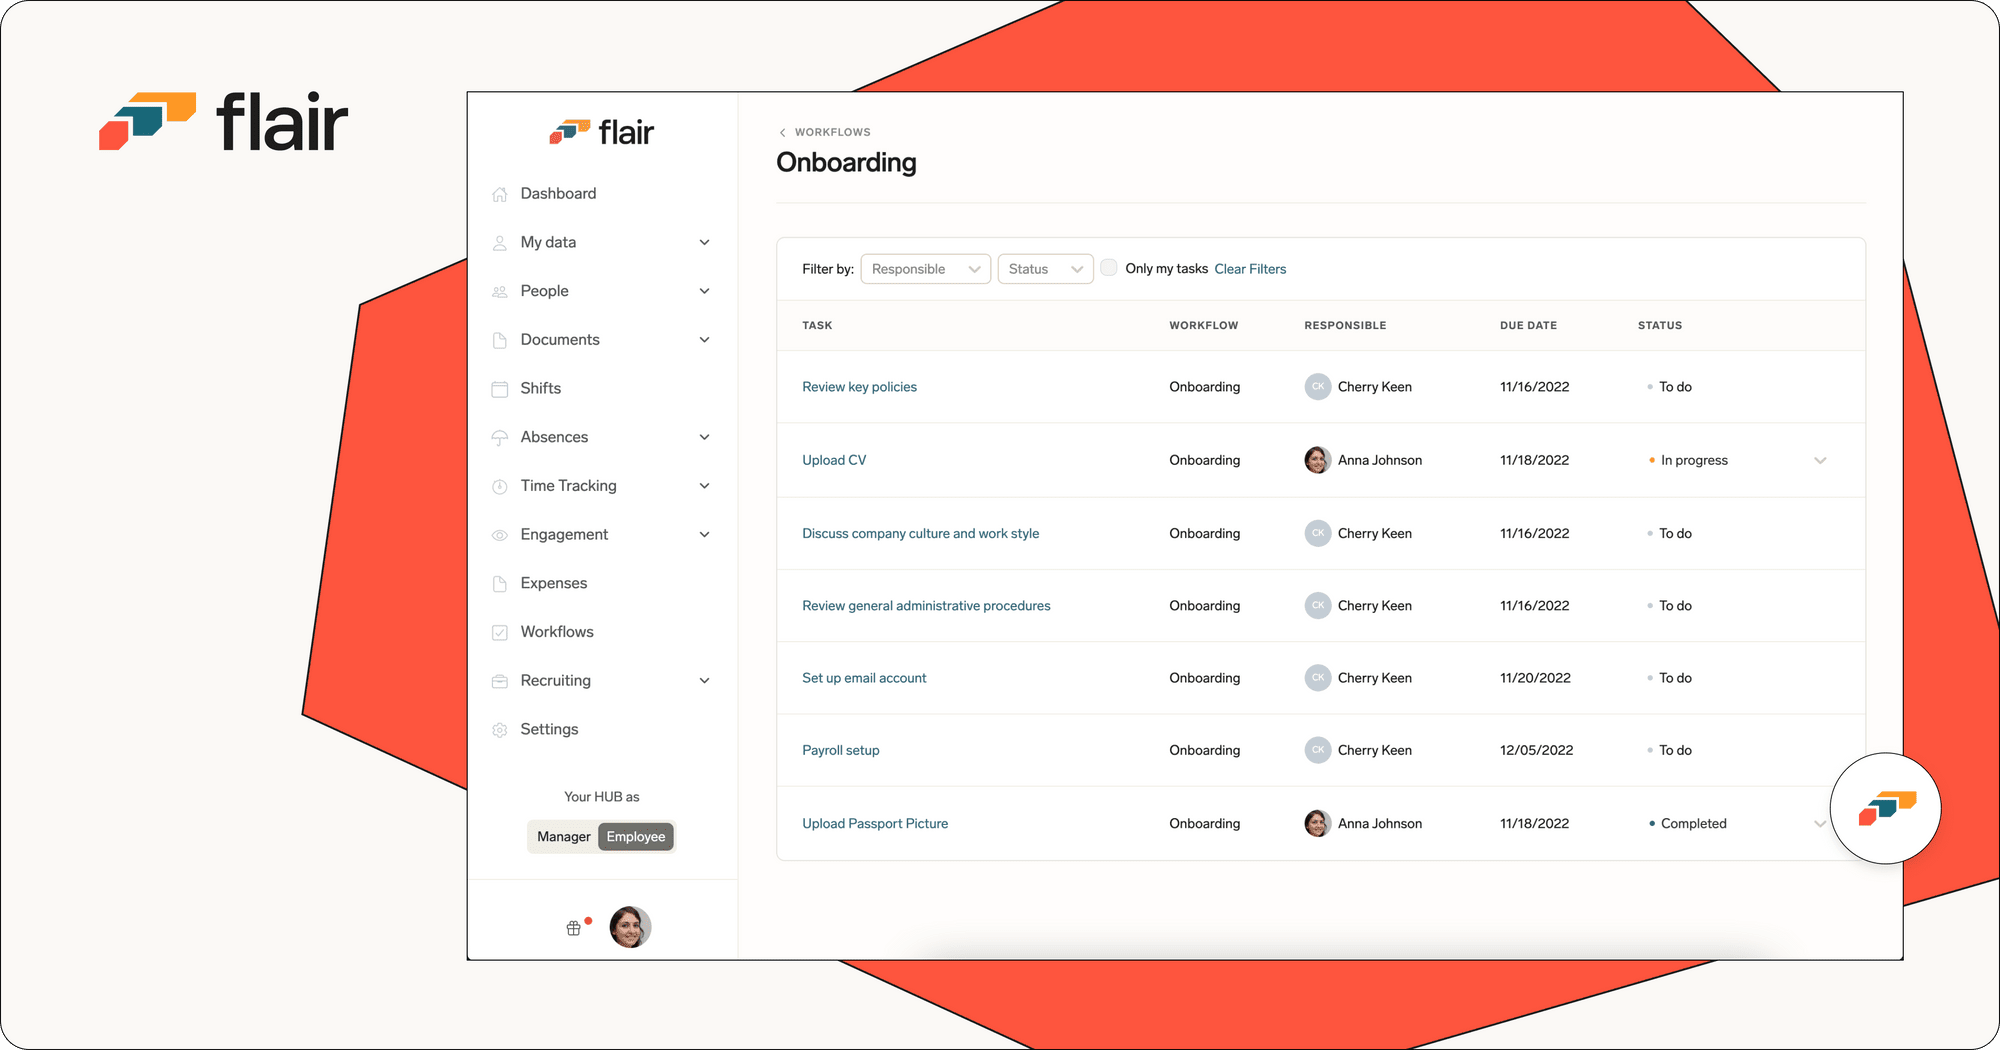 An onboarding worklfow in the flair Employee Hub